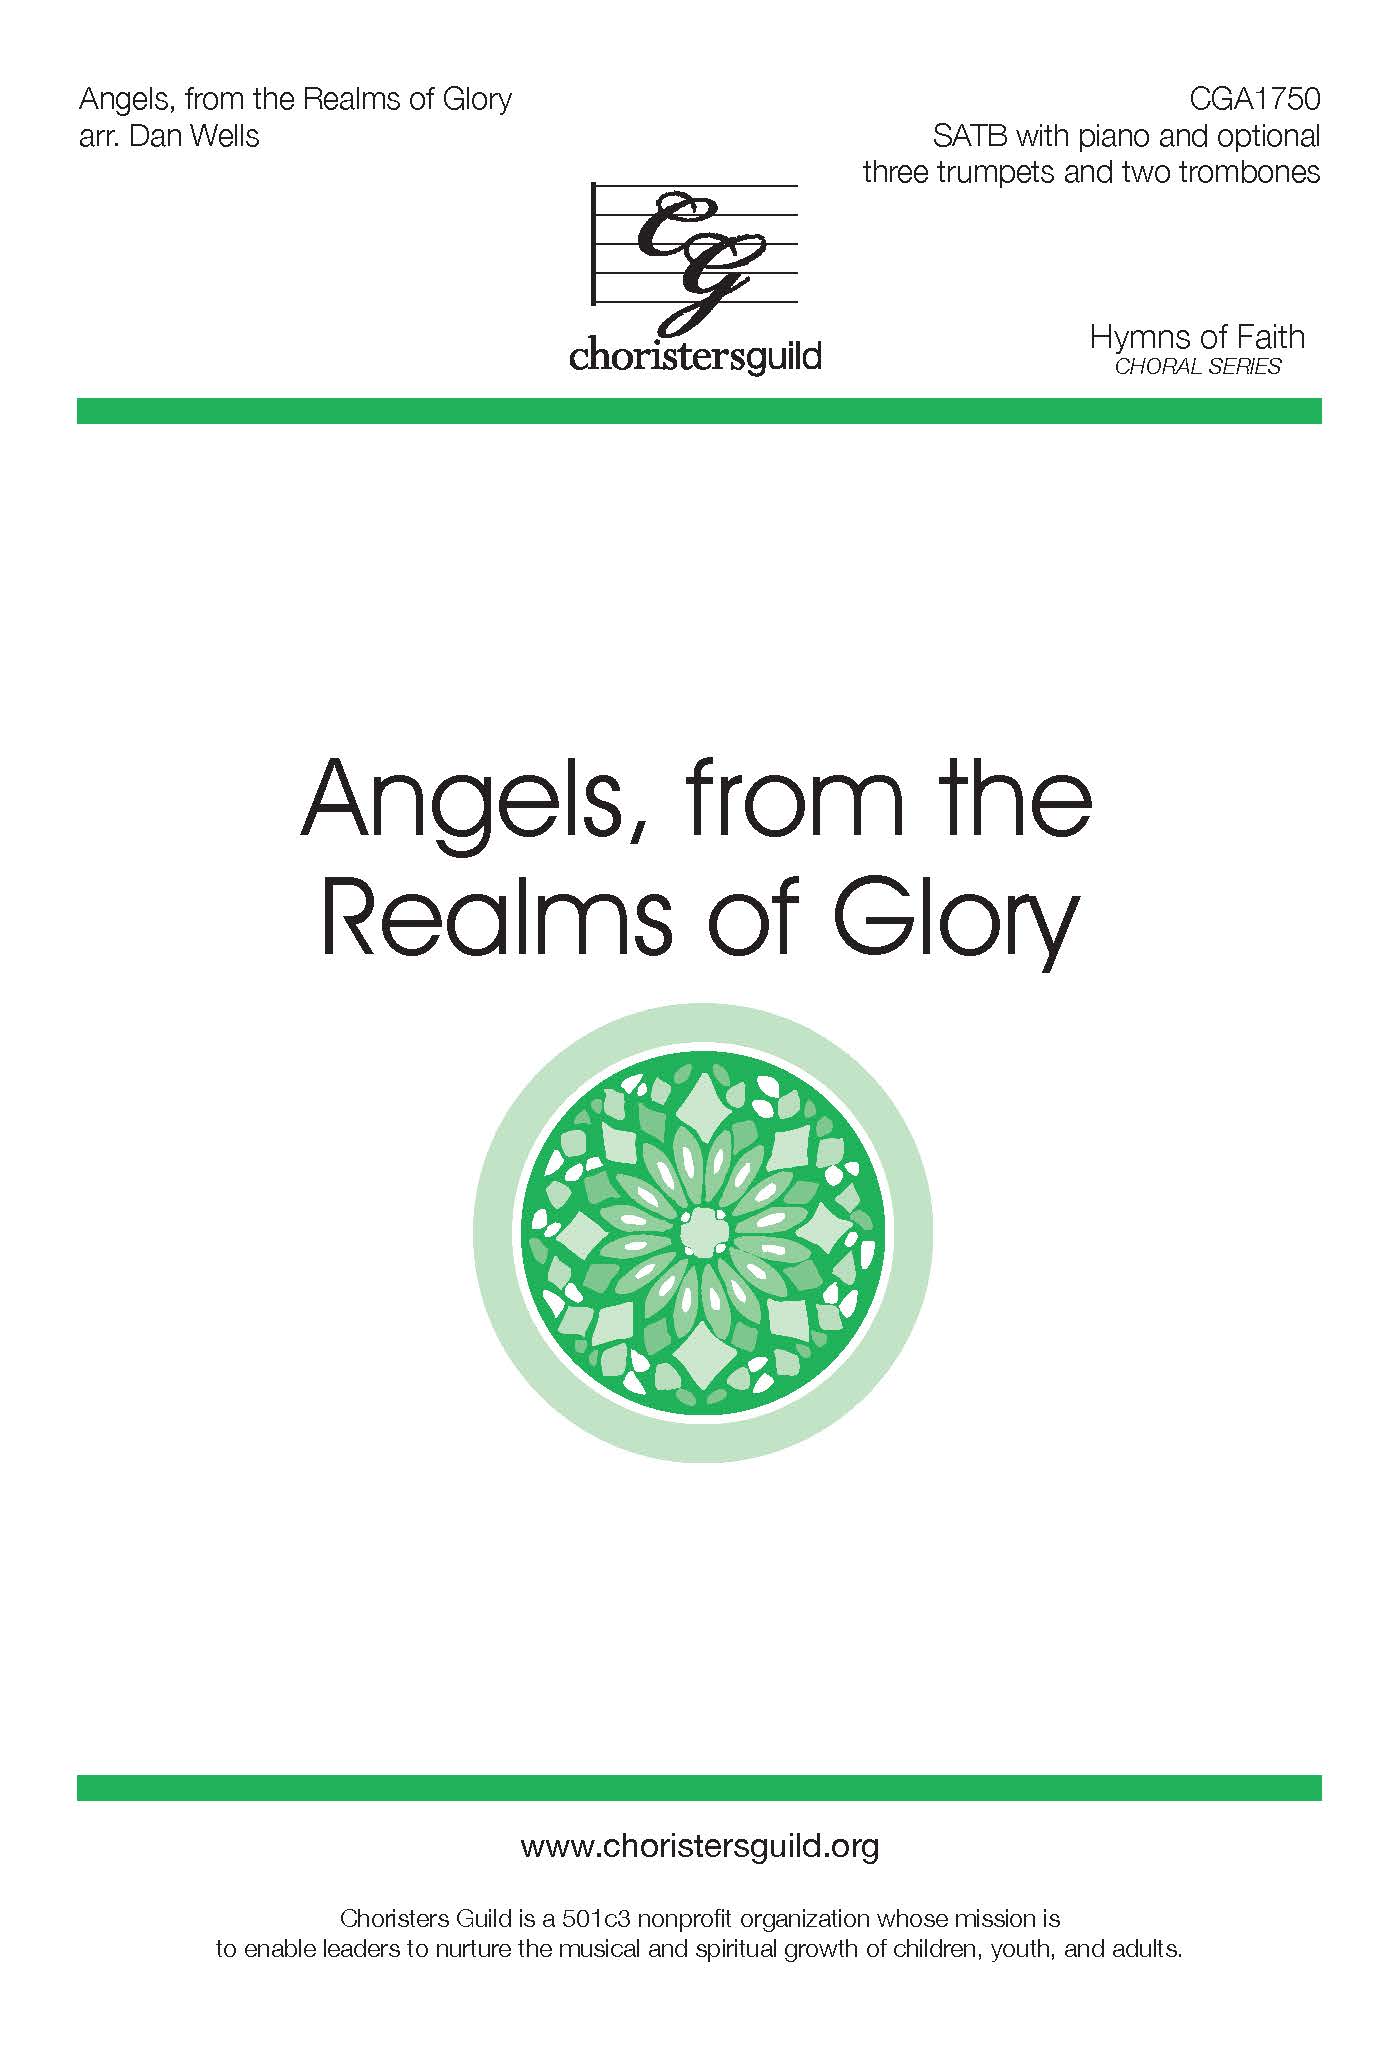 Angels, from the Realms of Glory - SATB